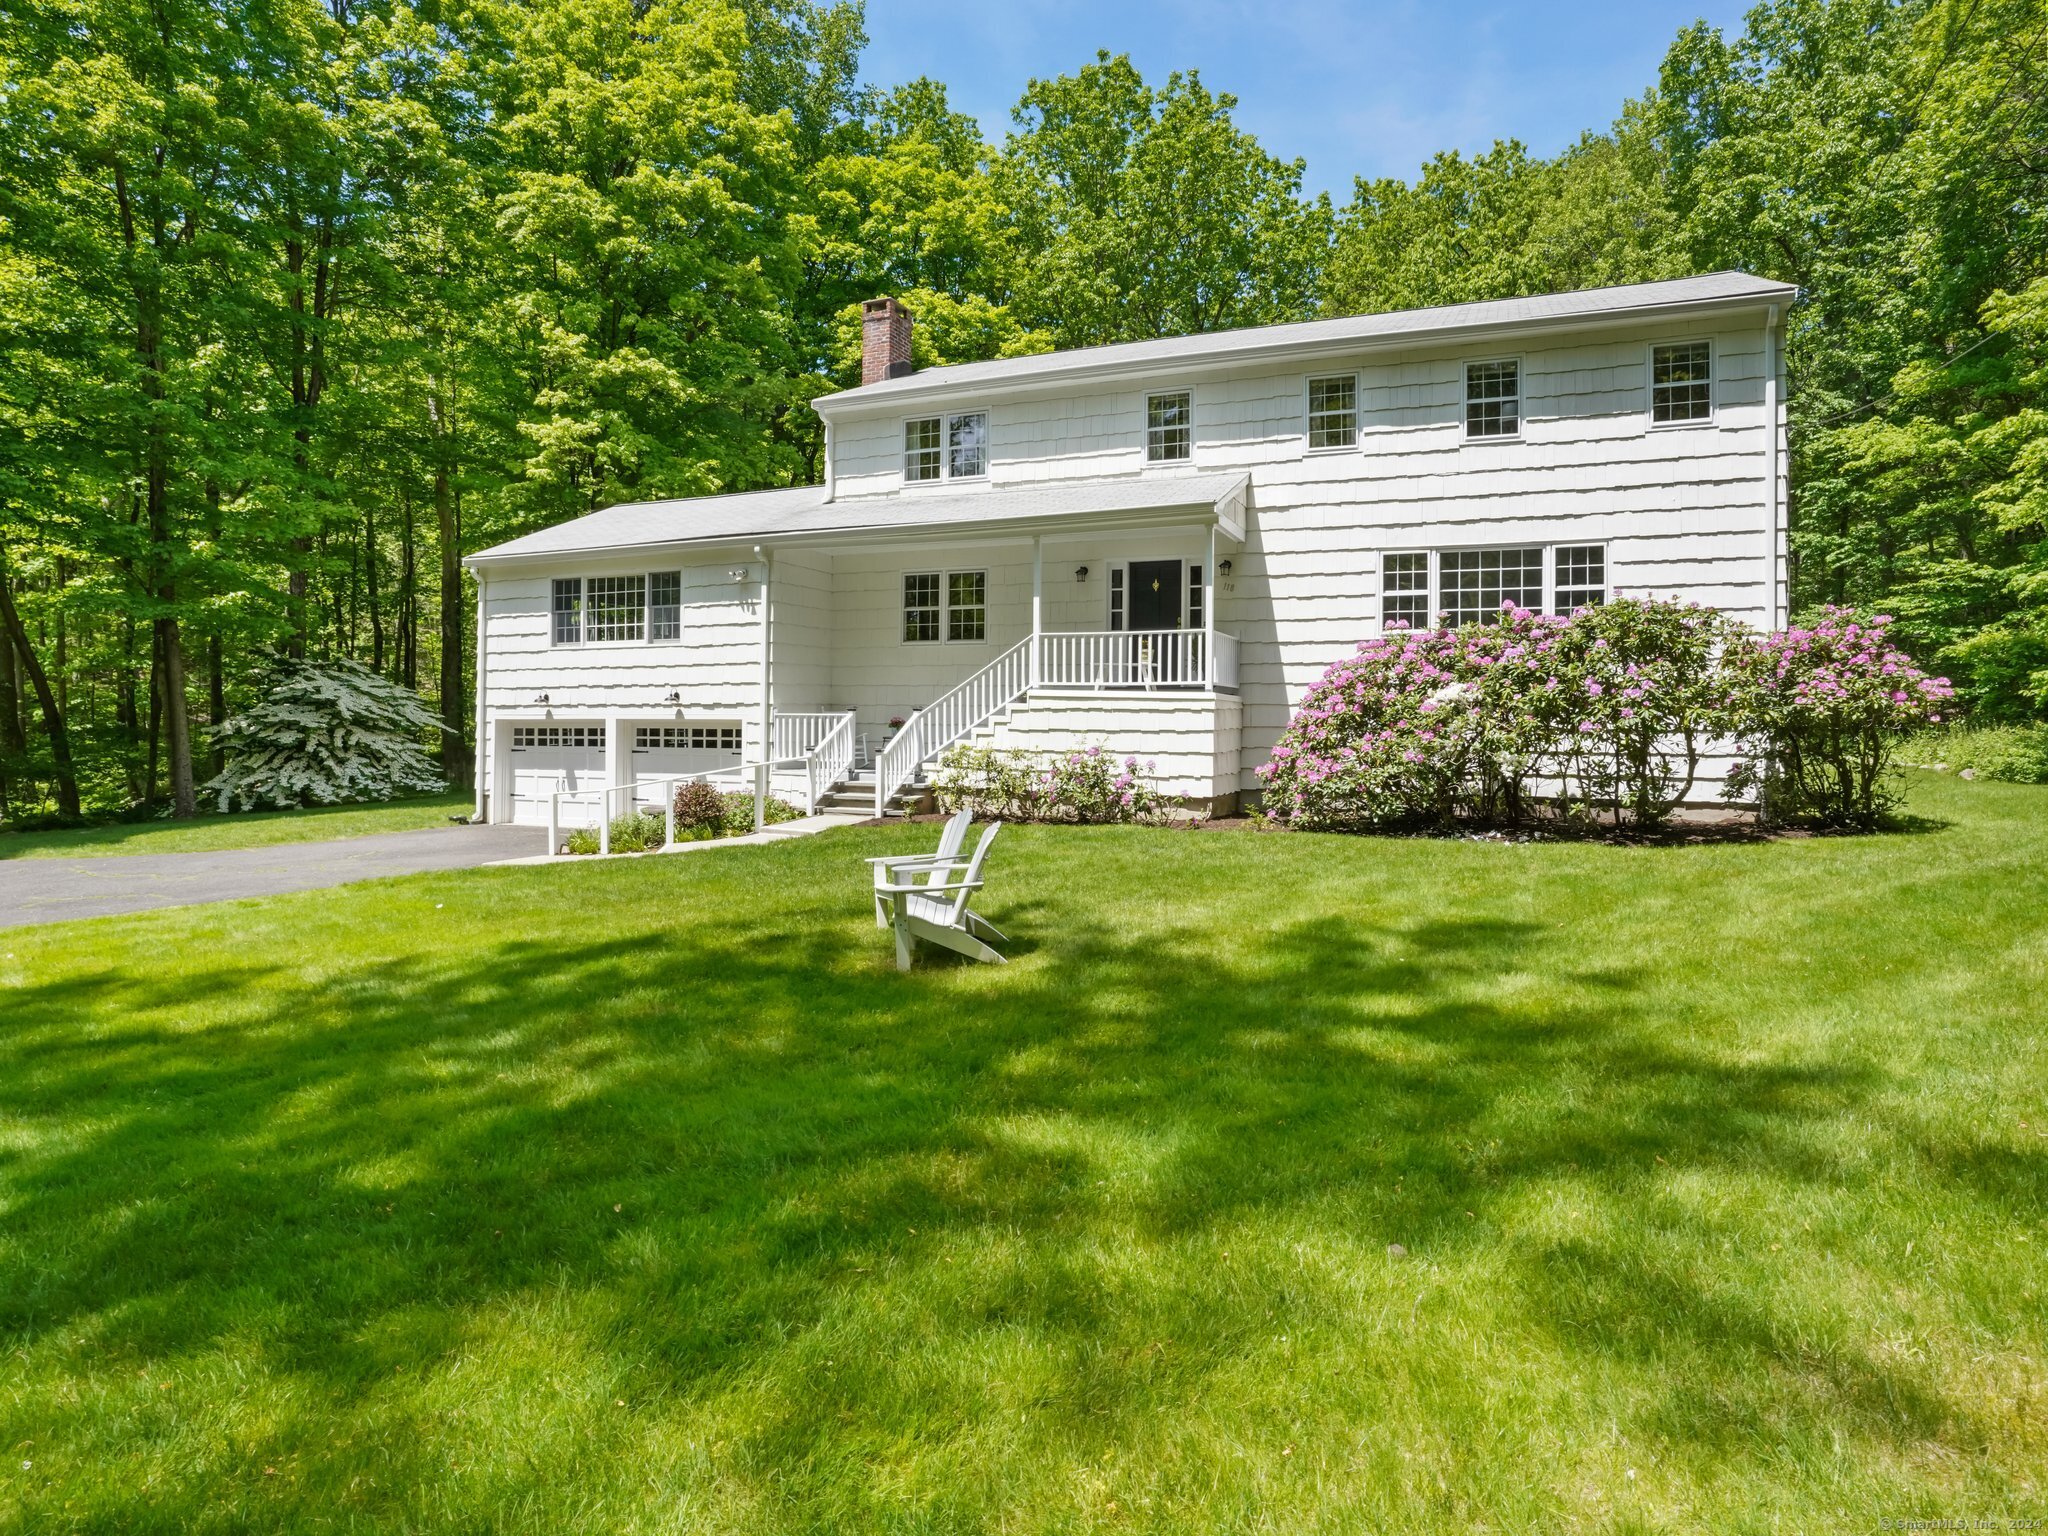 Lovely colonial home nestled on 4.5 private, tranquil acres